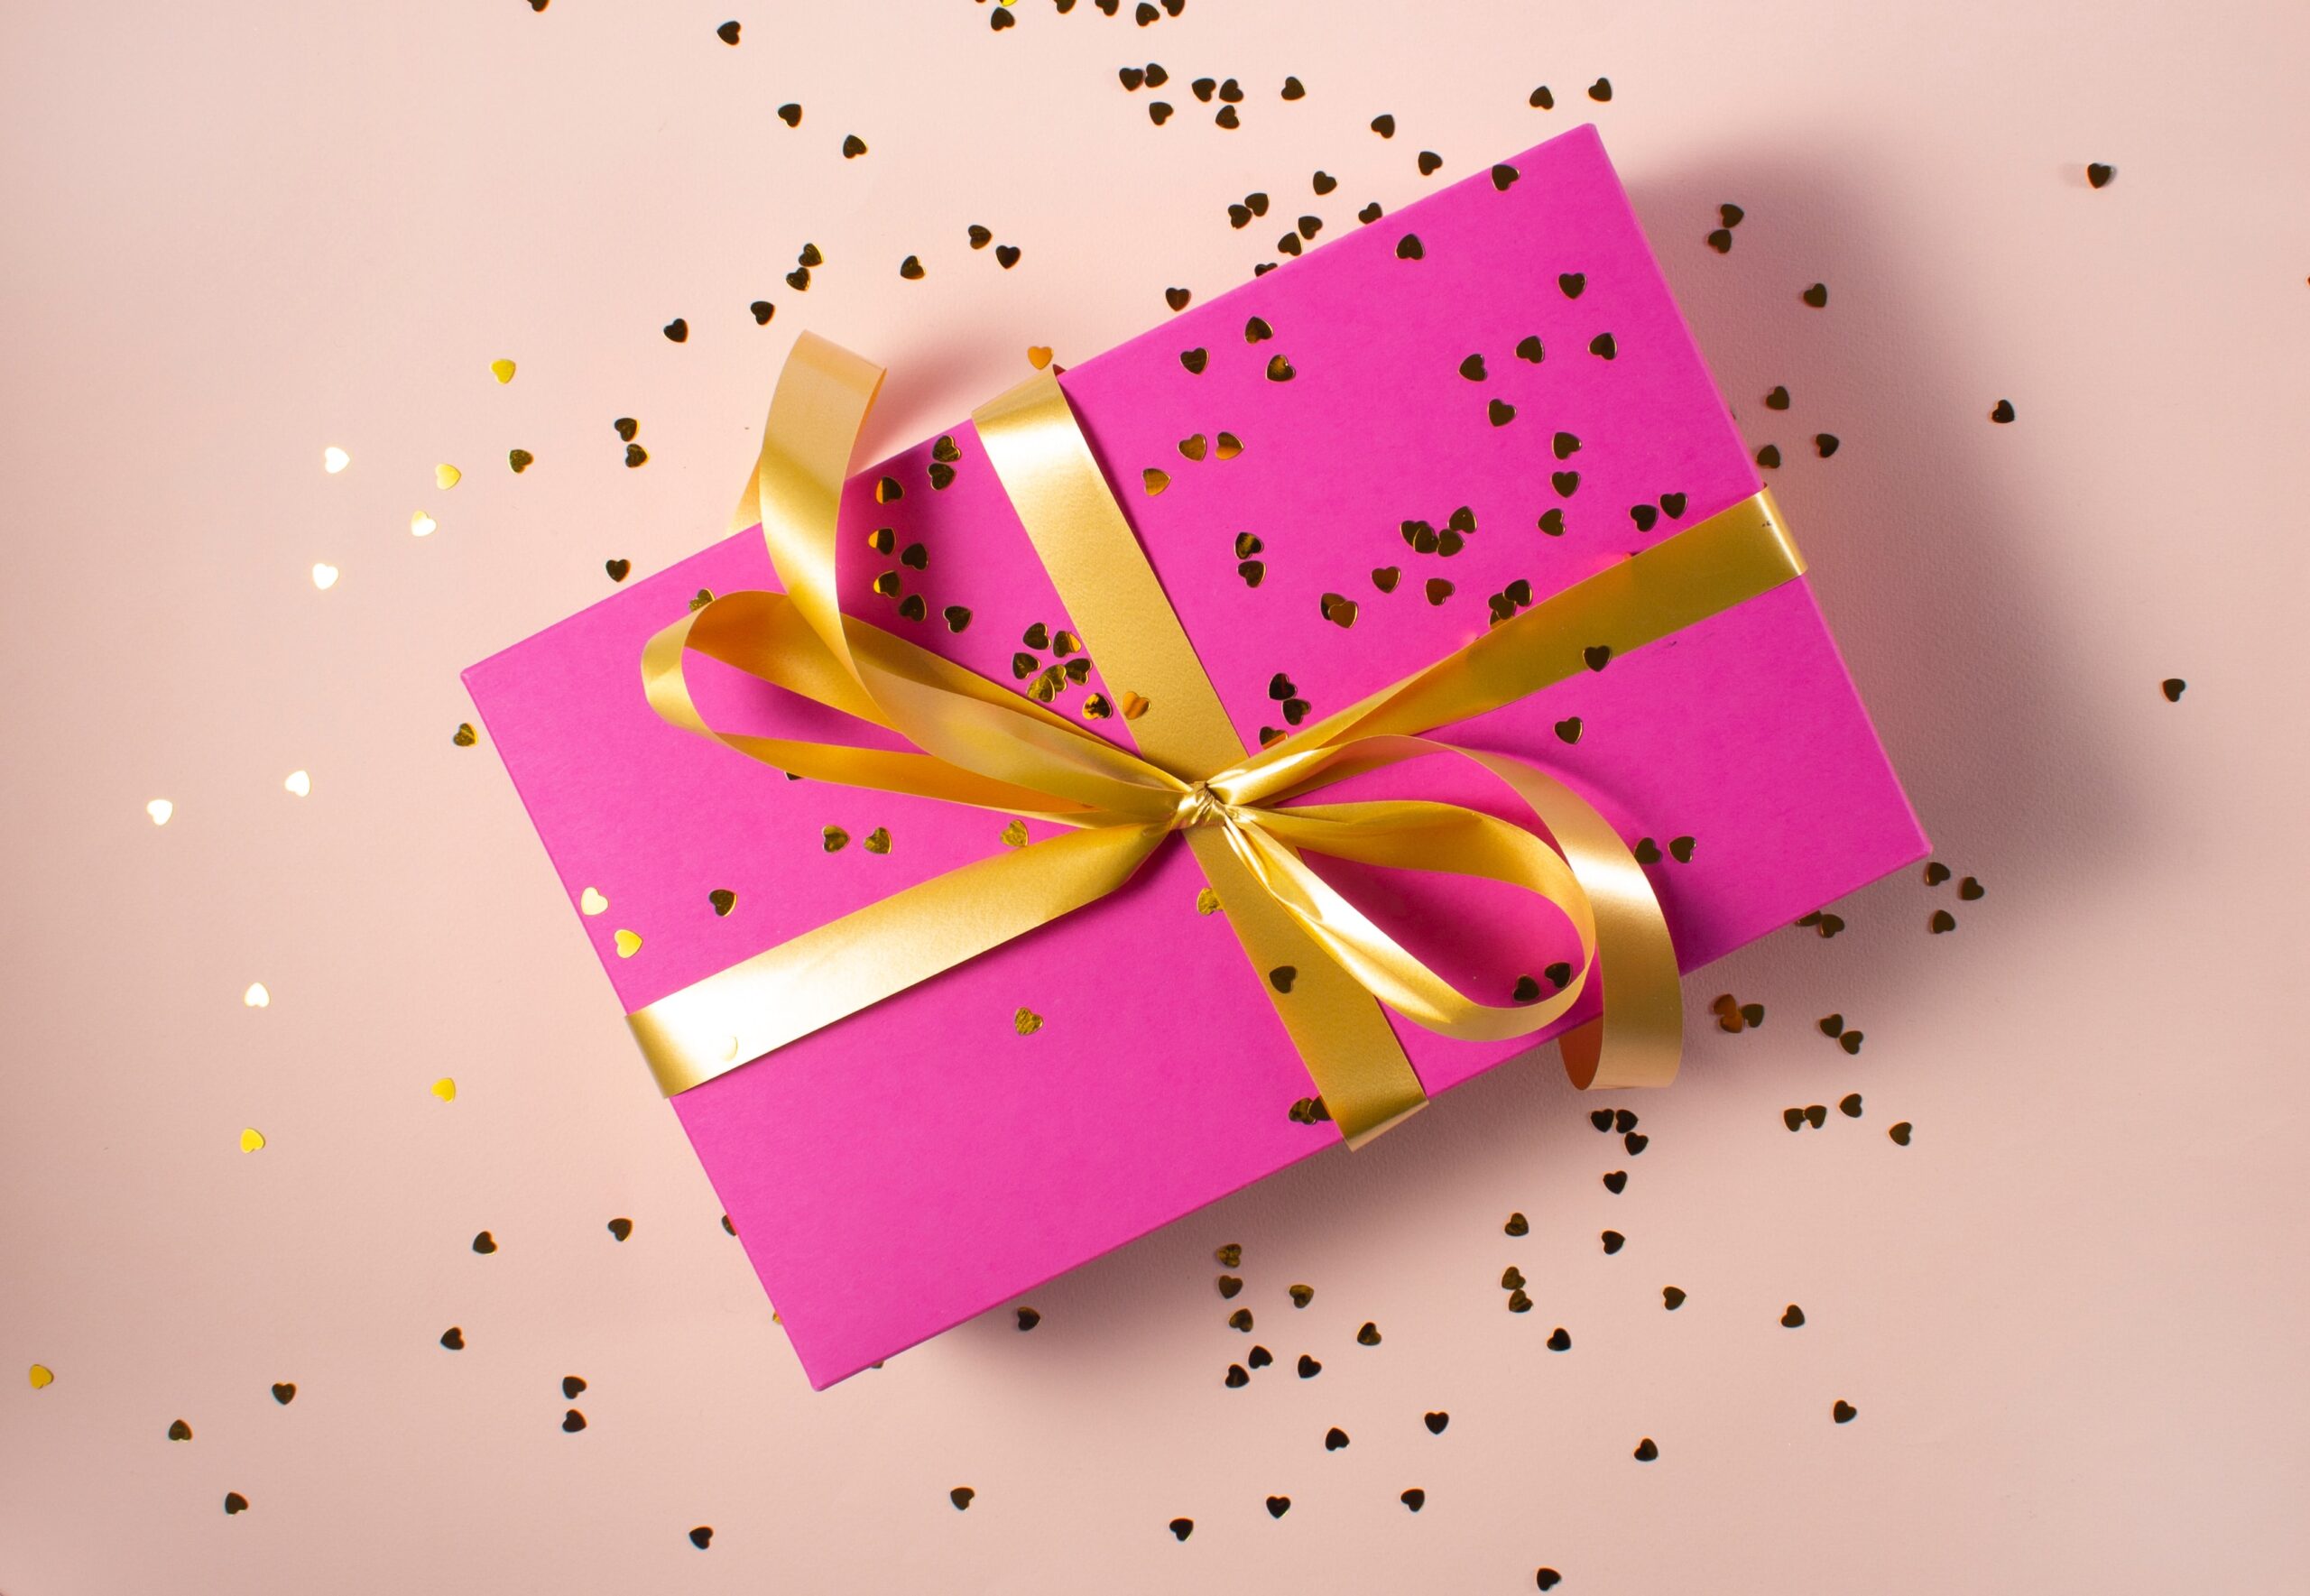 A present wrapped in pink paper with a gold ribbon and bow. There is glitter sprinkled across the top